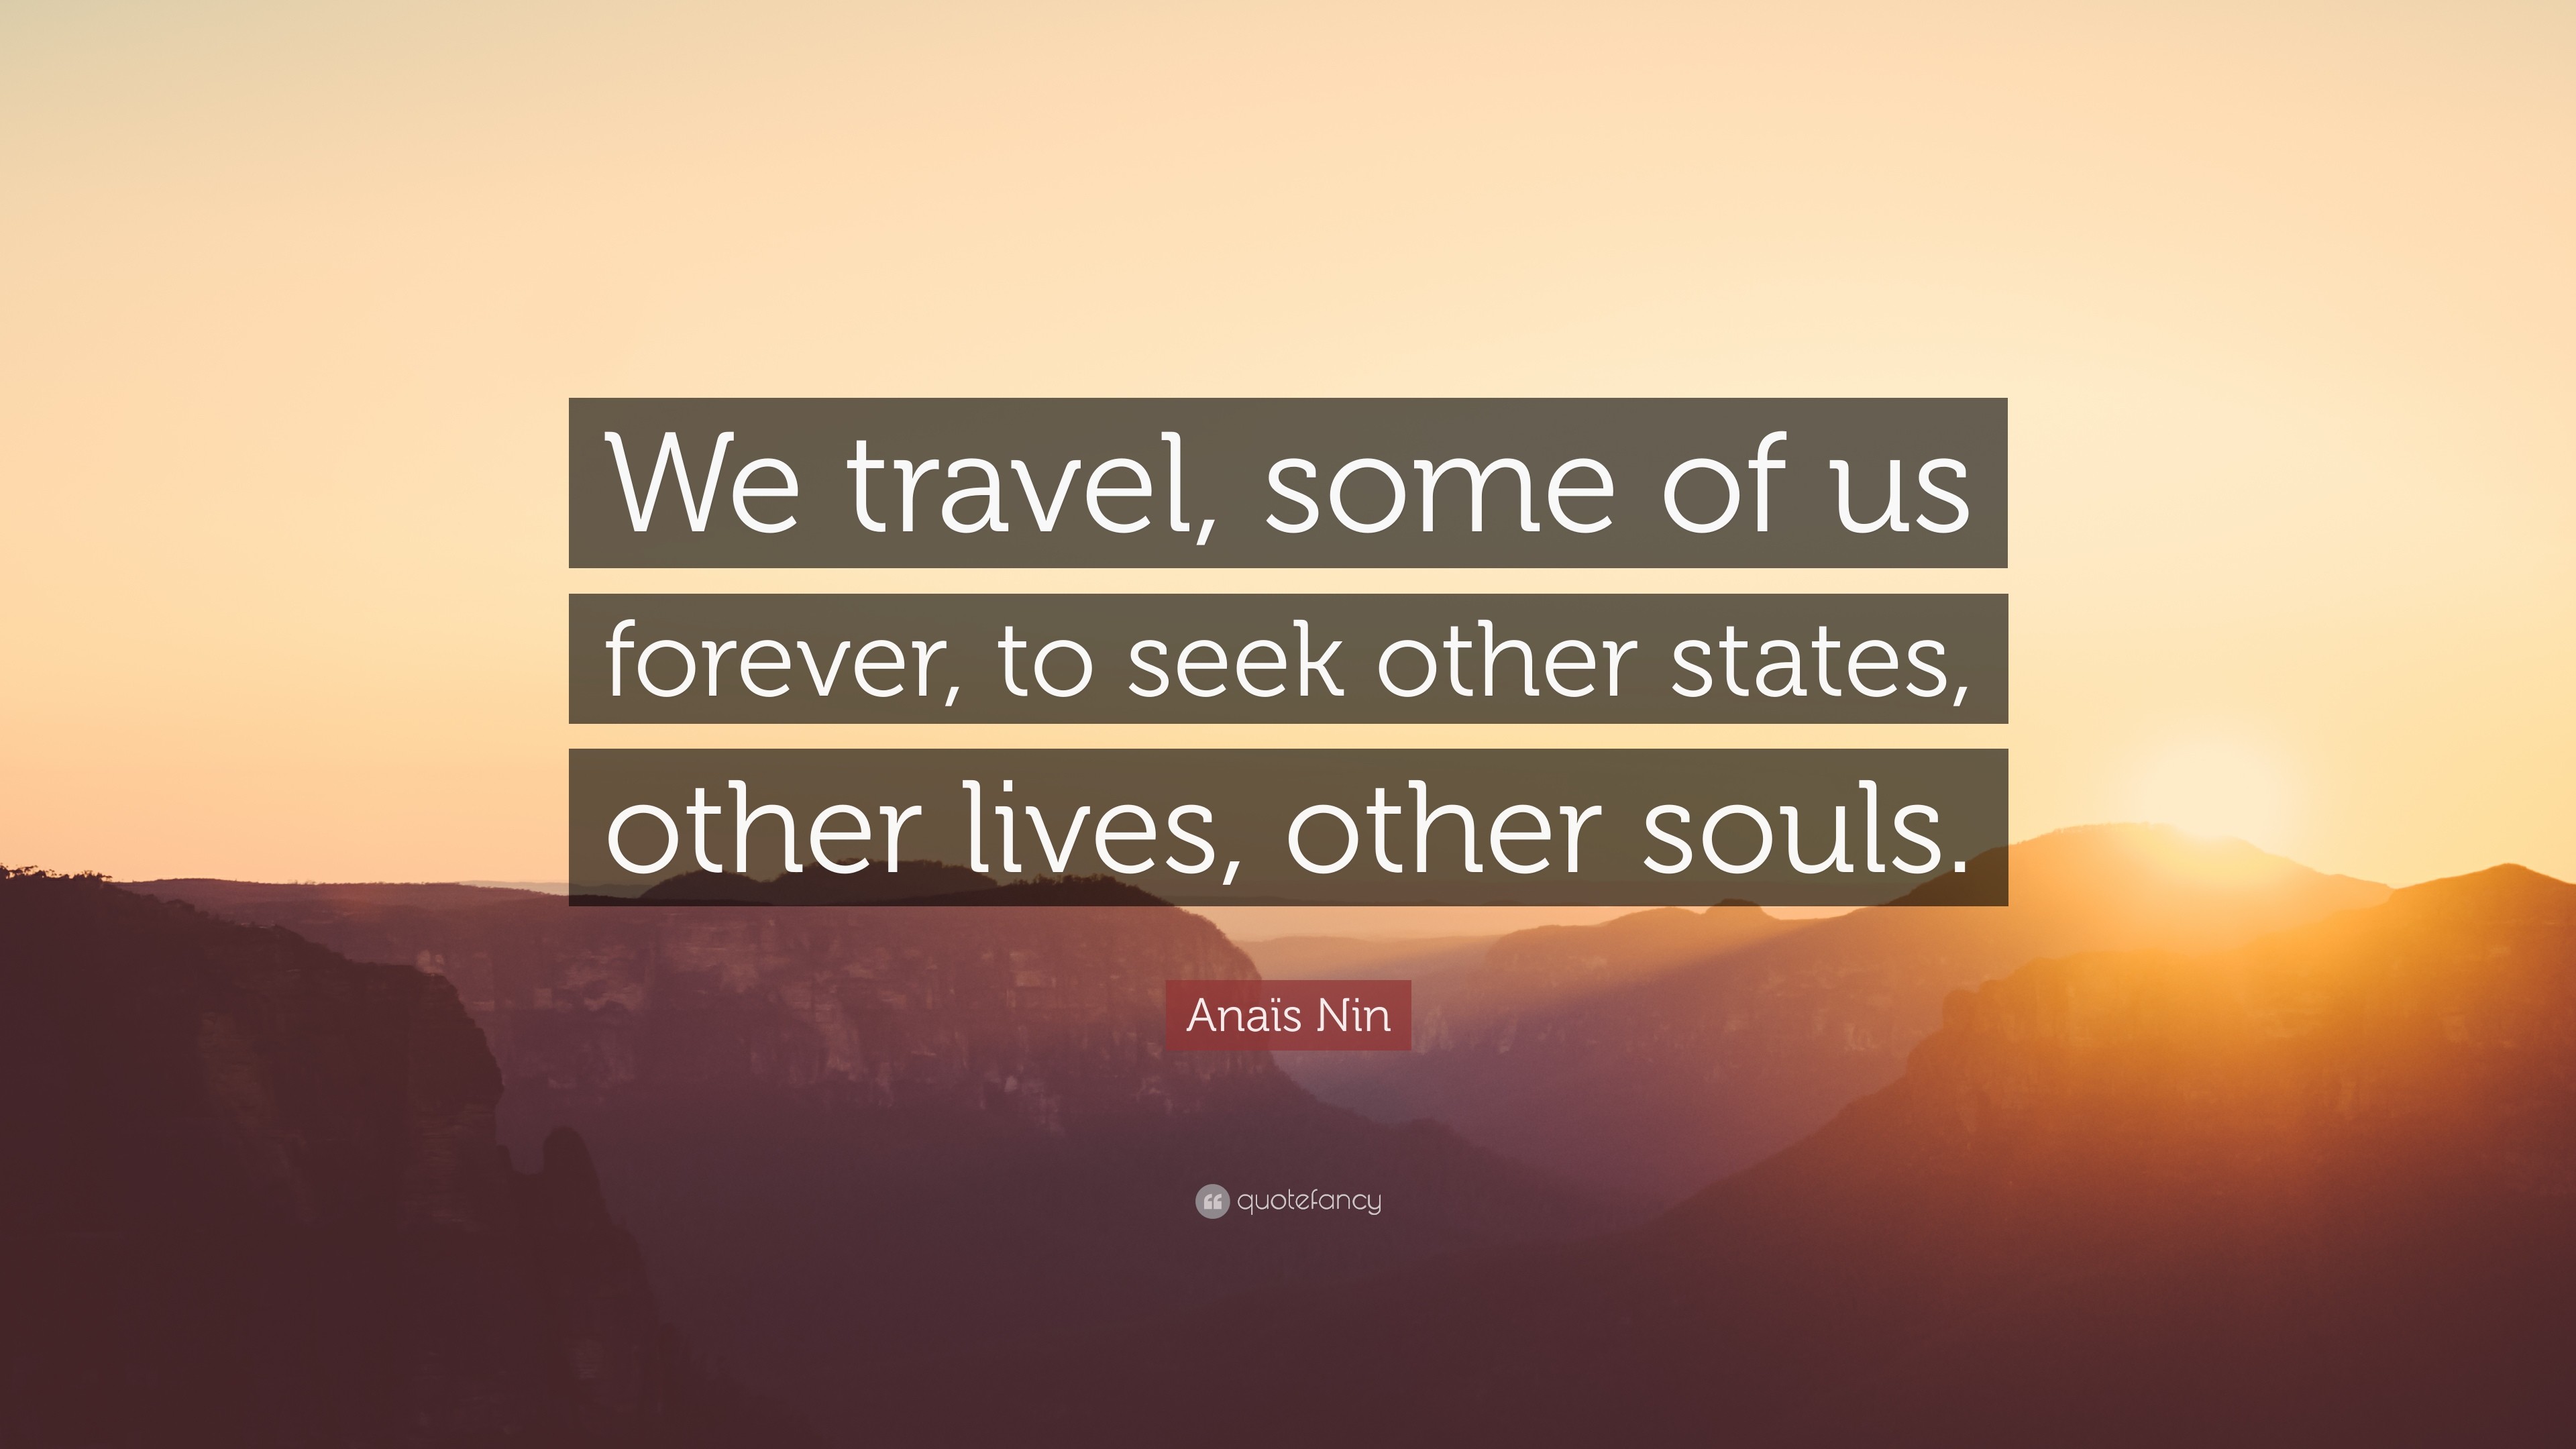 3840x2160 AnaÃ¯s Nin Quote: “We travel, some of us forever, to seek other